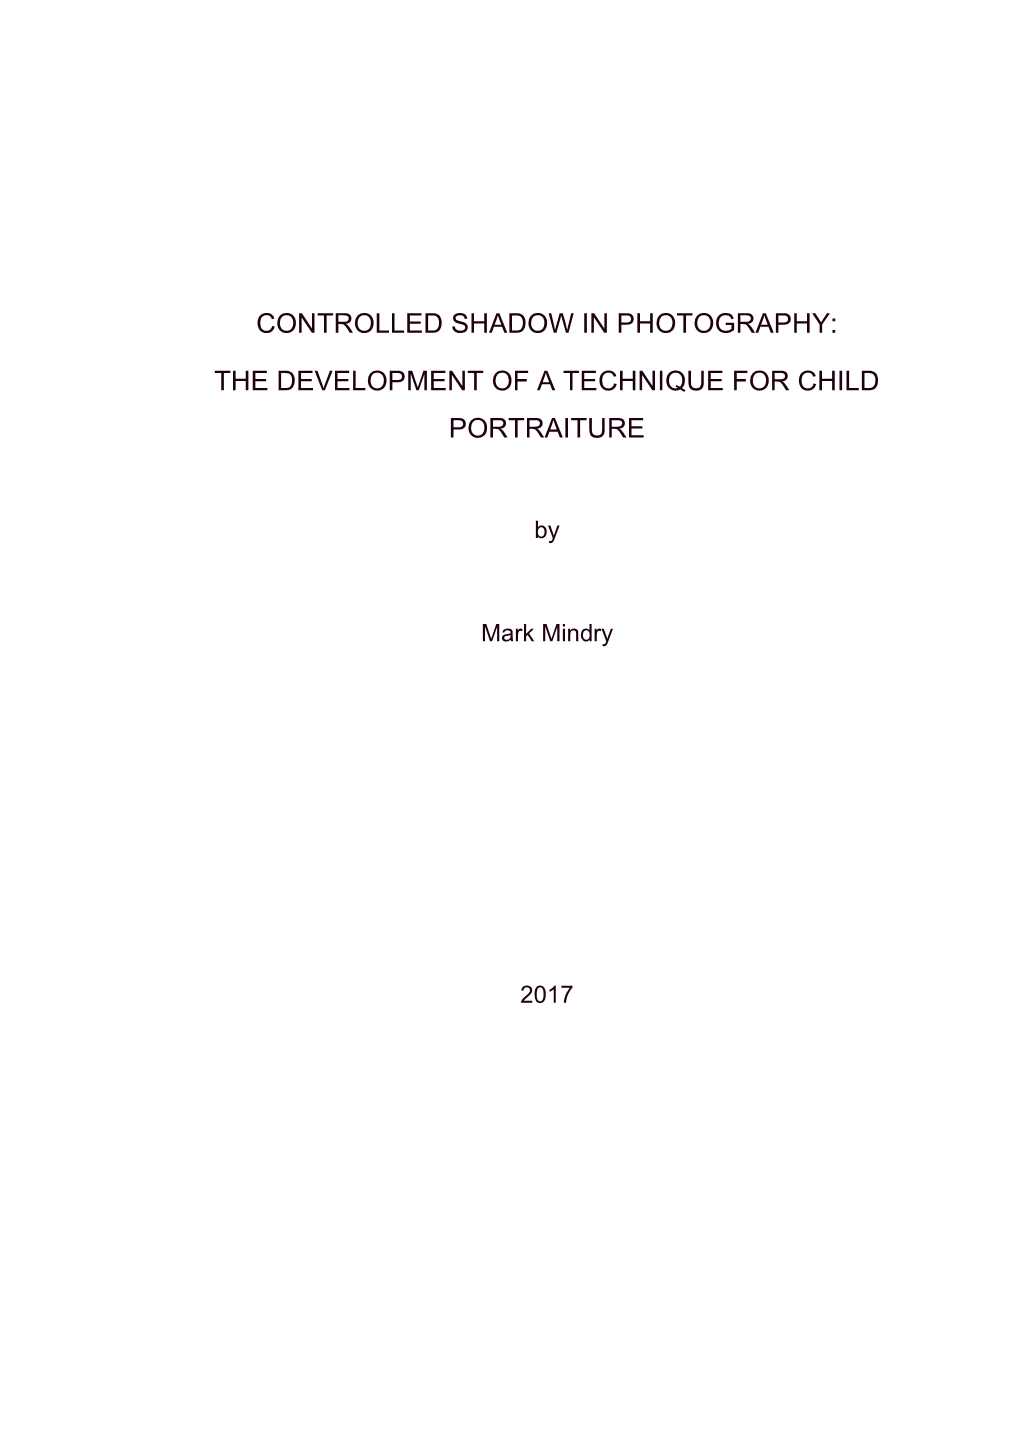 Controlled Shadow in Photography